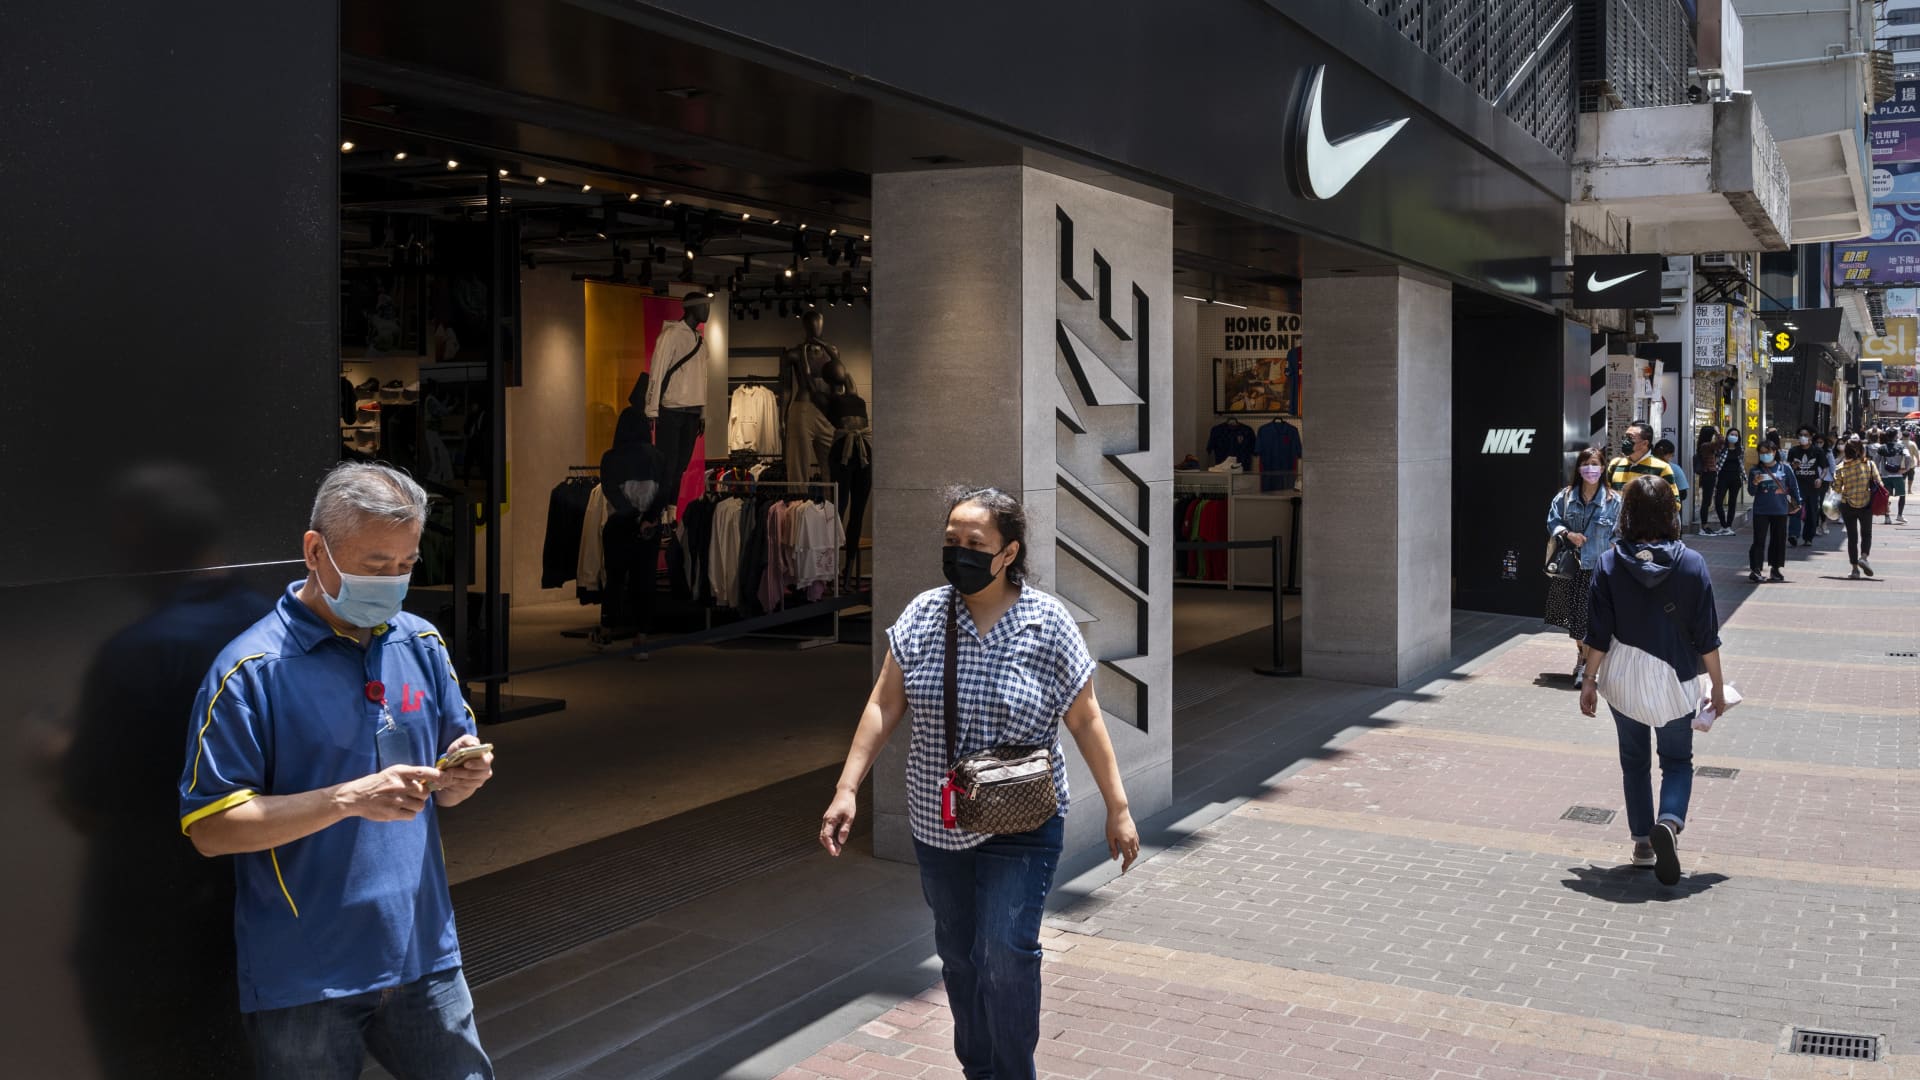 Pedestrians walk past the American multinational sport clothing brand, Nike store and its logo seen in Hong Kong.